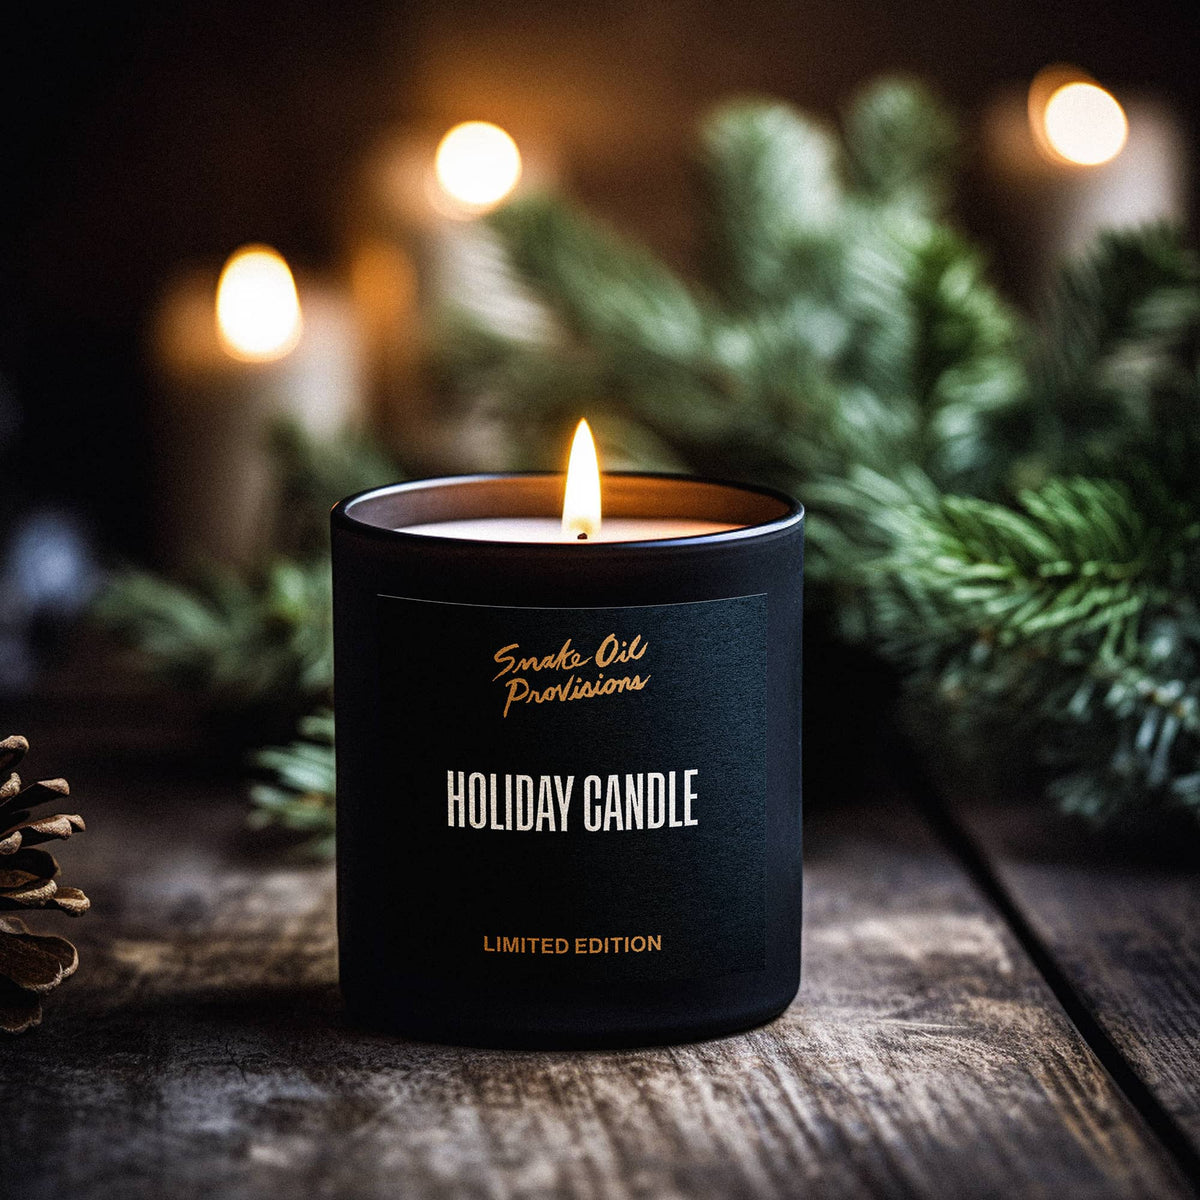 Snake Oil Provisions Holiday Candle — 7.2oz Hand Poured Candle